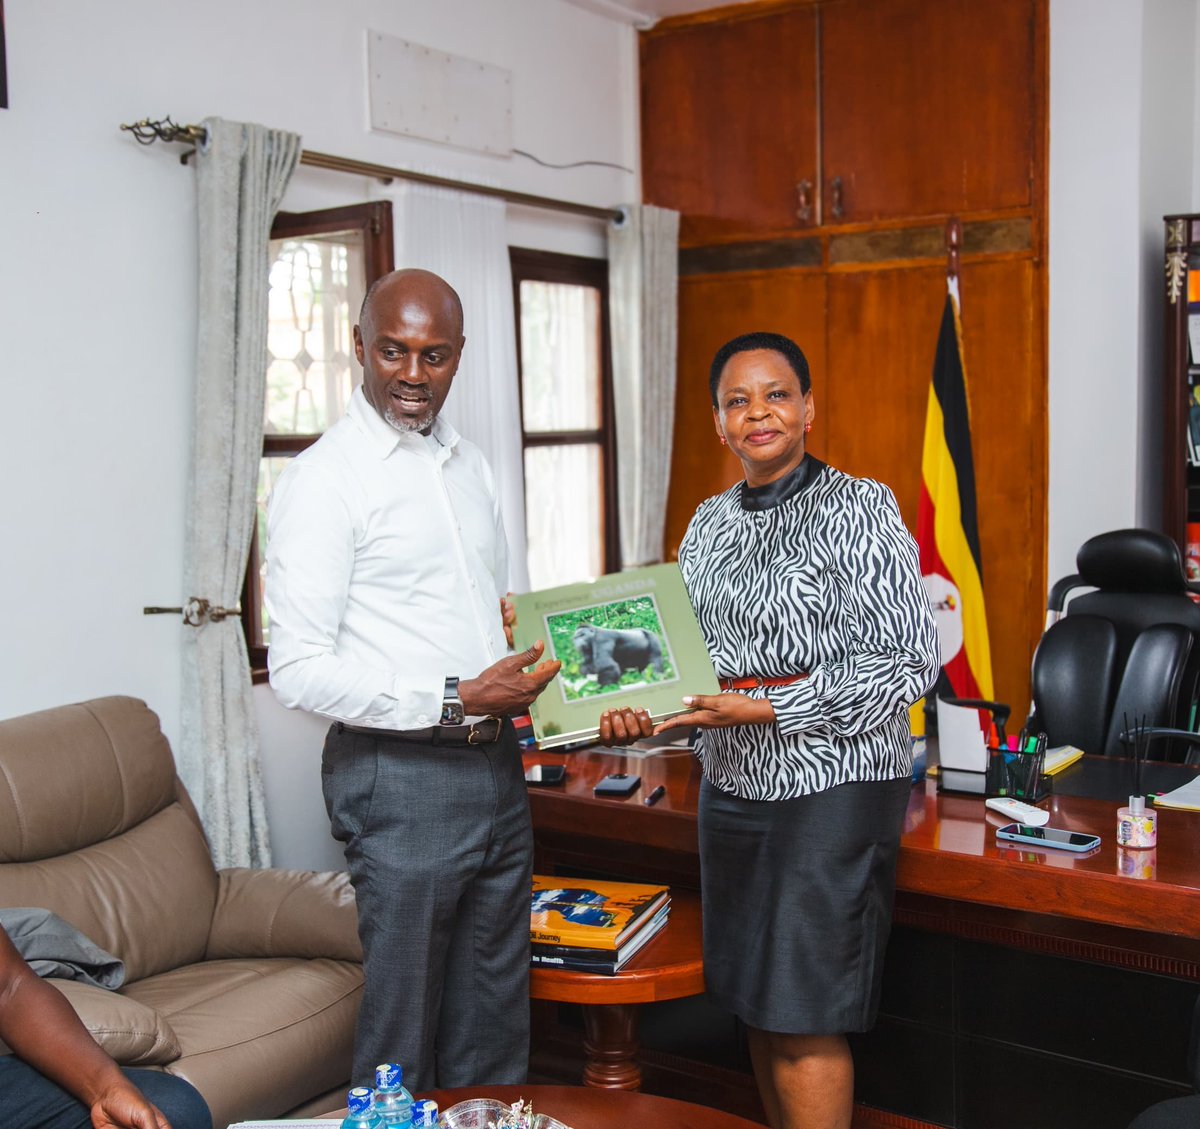 Yesterday, Col. Edith Nakalema, head @ShieldInvestors, engaged in a productive discussion with Senior Journalist @AndrewMwenda. Their dialogue encompassed the use of EIPP (protection.statehouseinvest.go.ug) to safeguard investors @edthnaka #EmpoweringInvestors should be our priority.